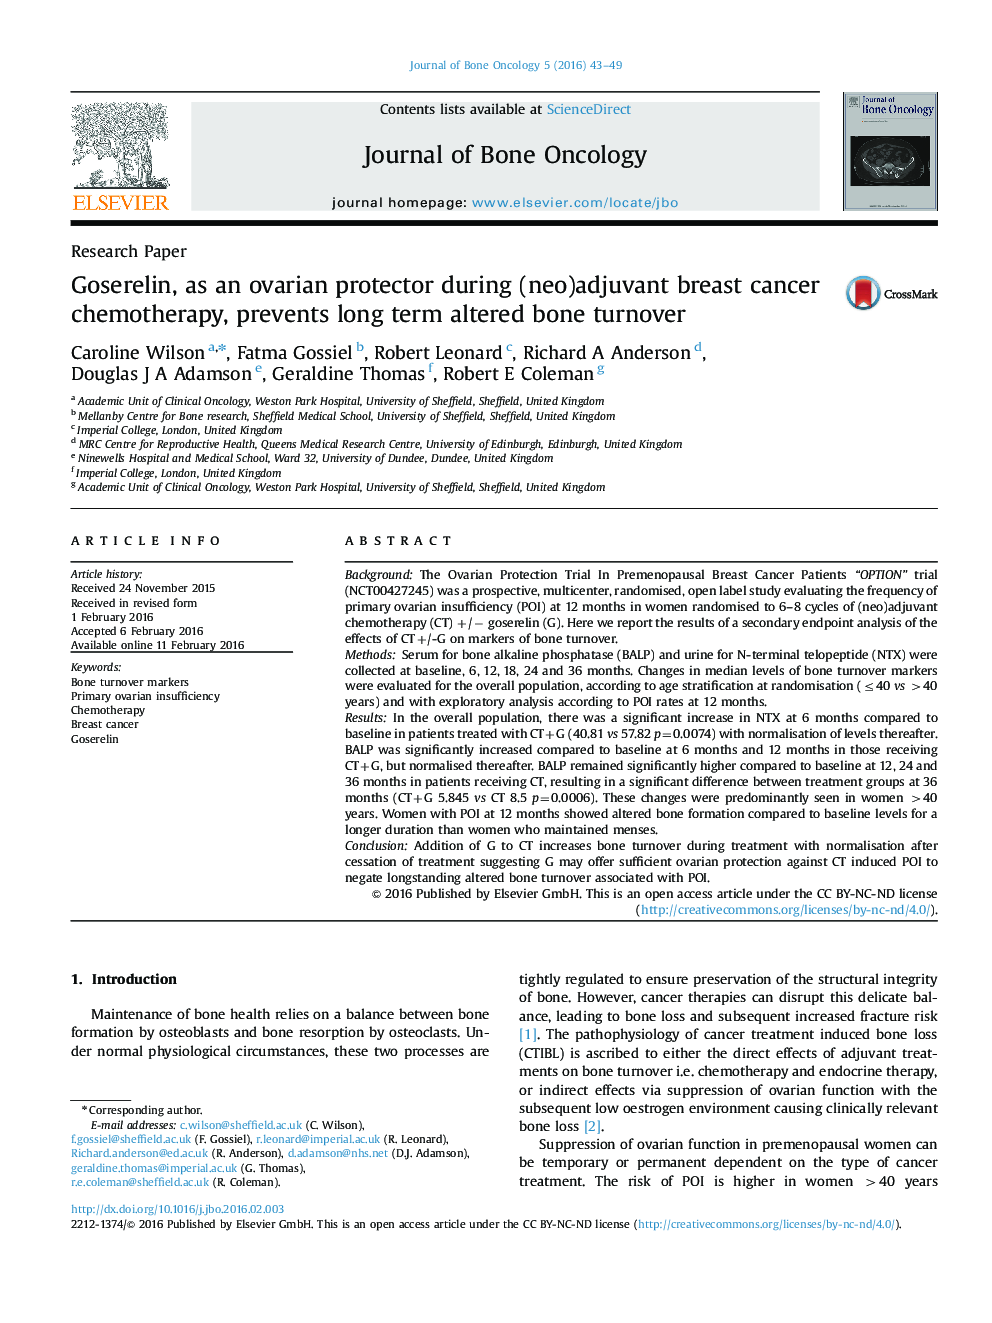 Goserelin, as an ovarian protector during (neo)adjuvant breast cancer chemotherapy, prevents long term altered bone turnover